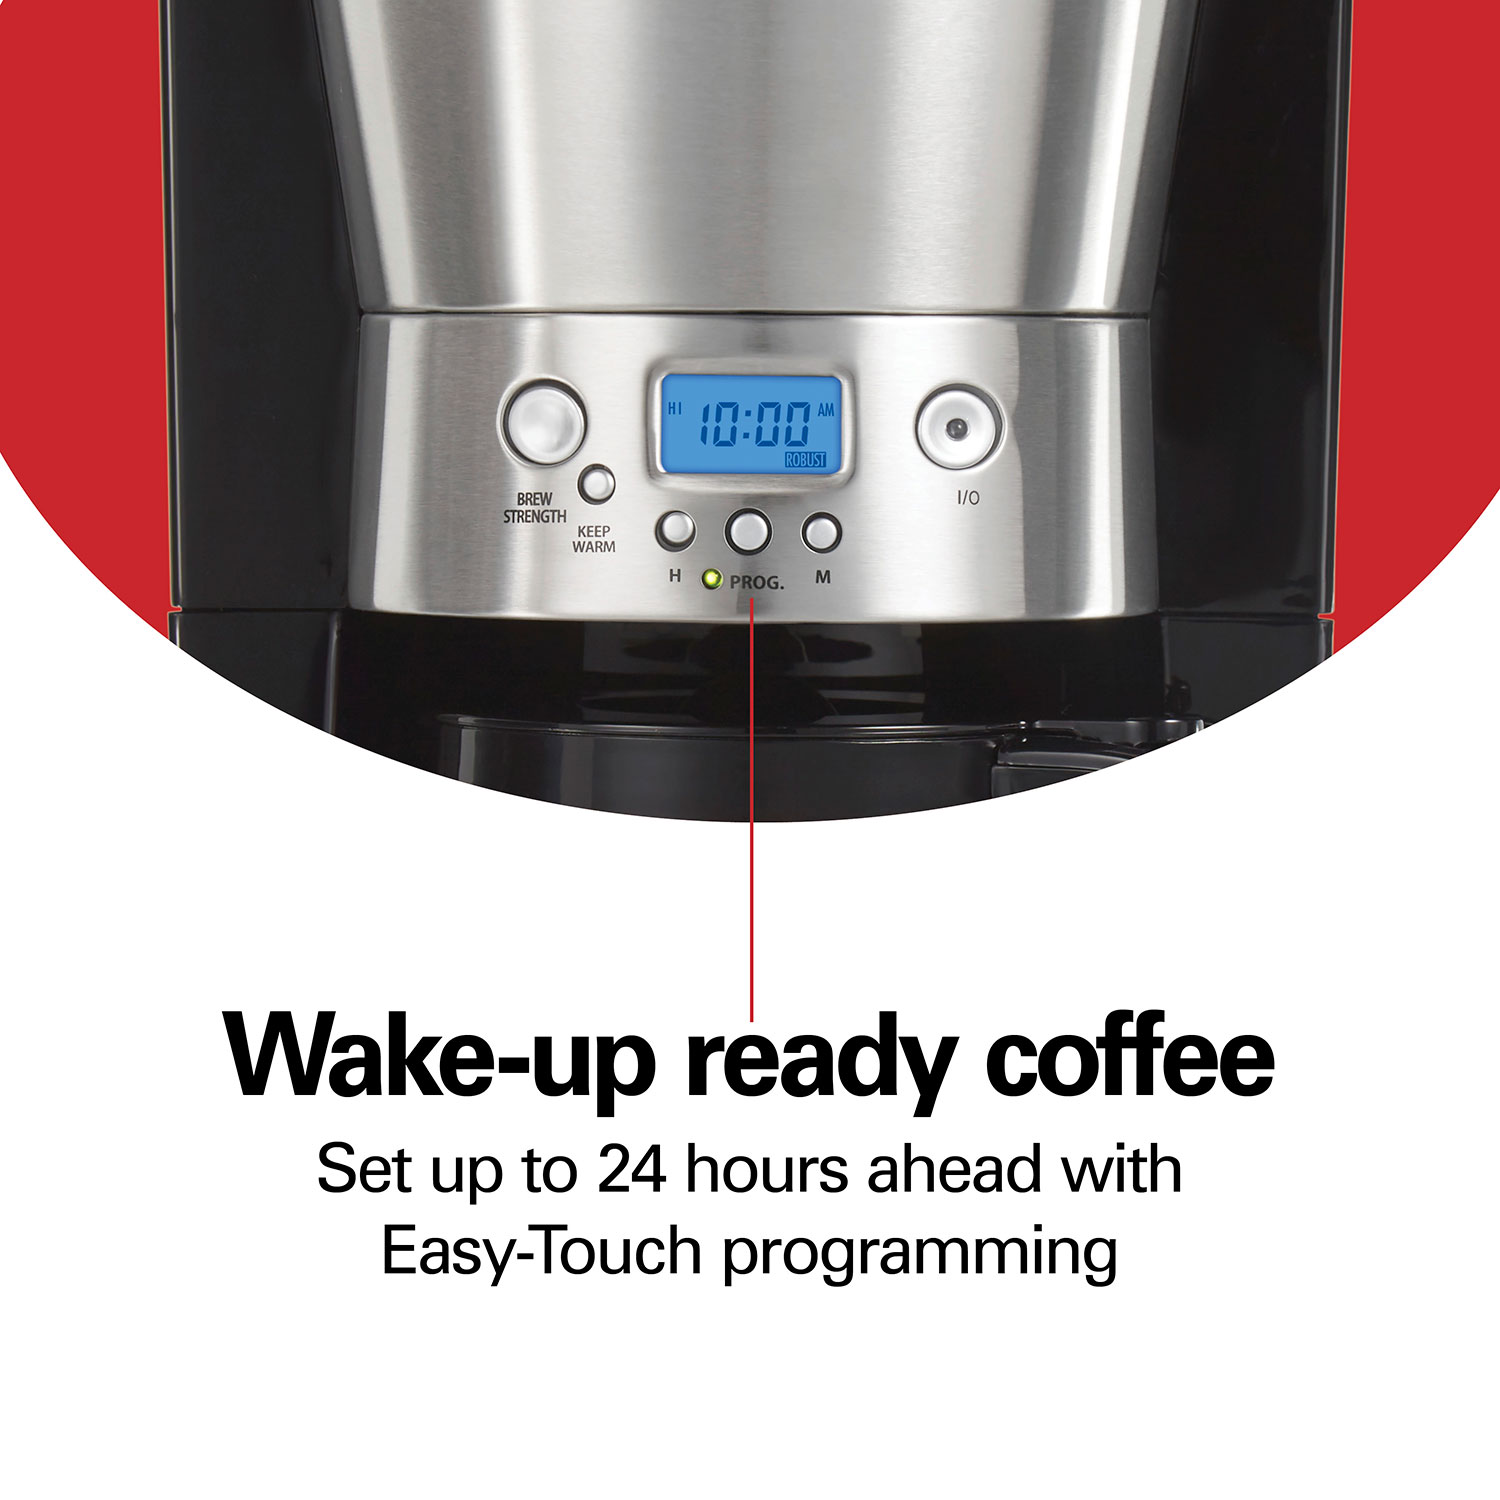 Hamilton Beach 12 Cup Programmable Coffee Maker with Cone Filter, Black ...